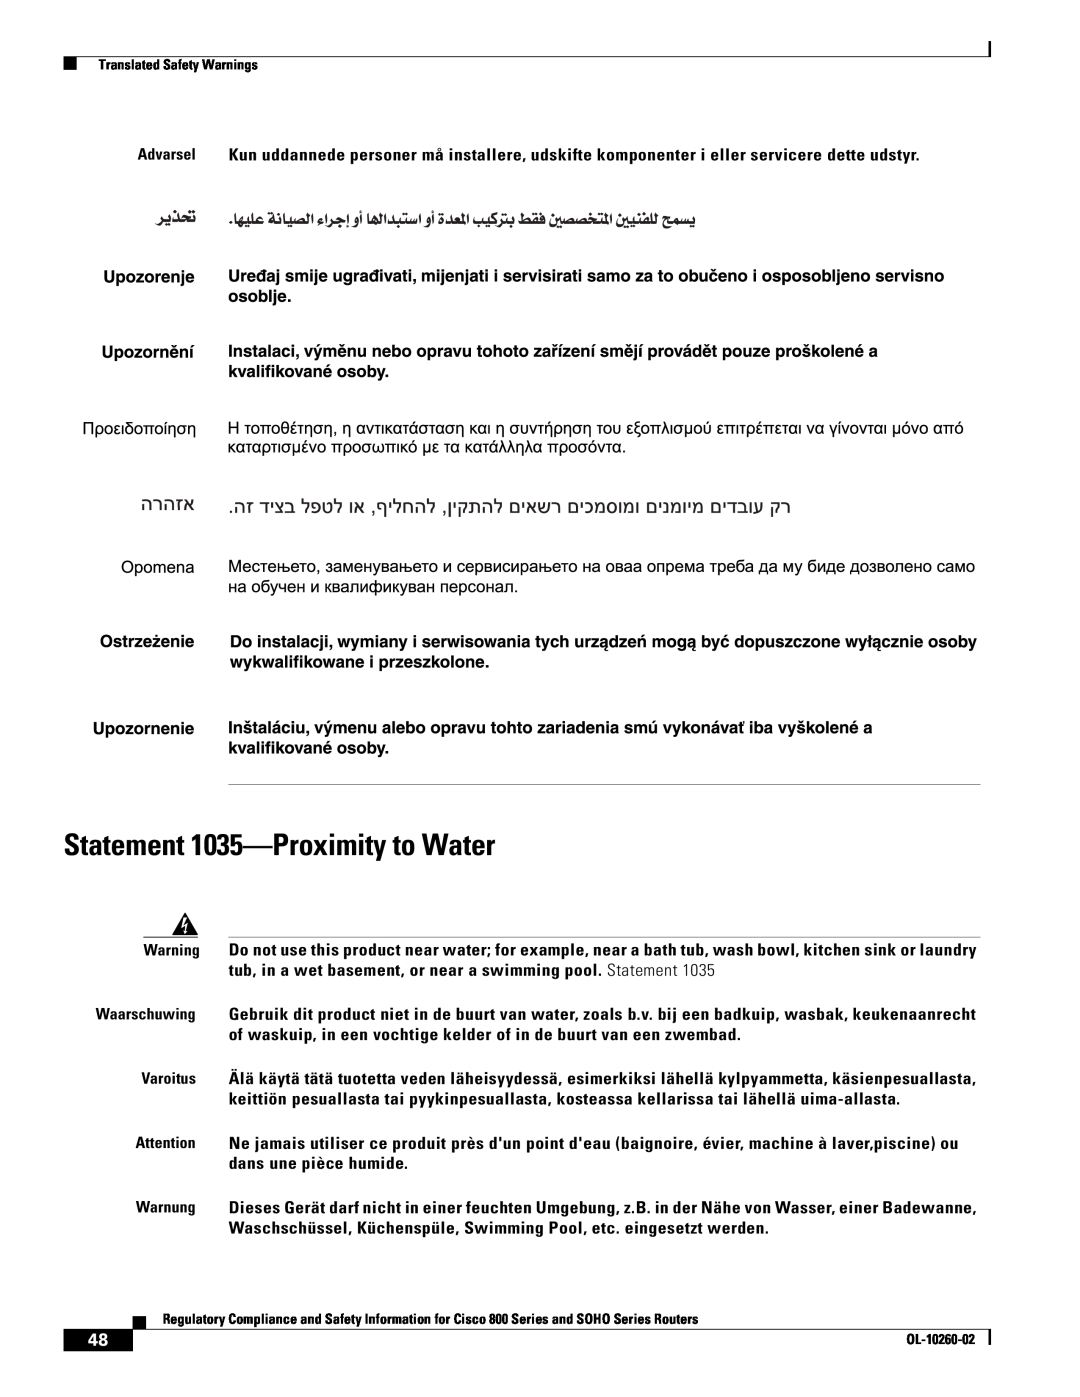 Cisco Systems SOHO Series manual Statement 1035-Proximity to Water 